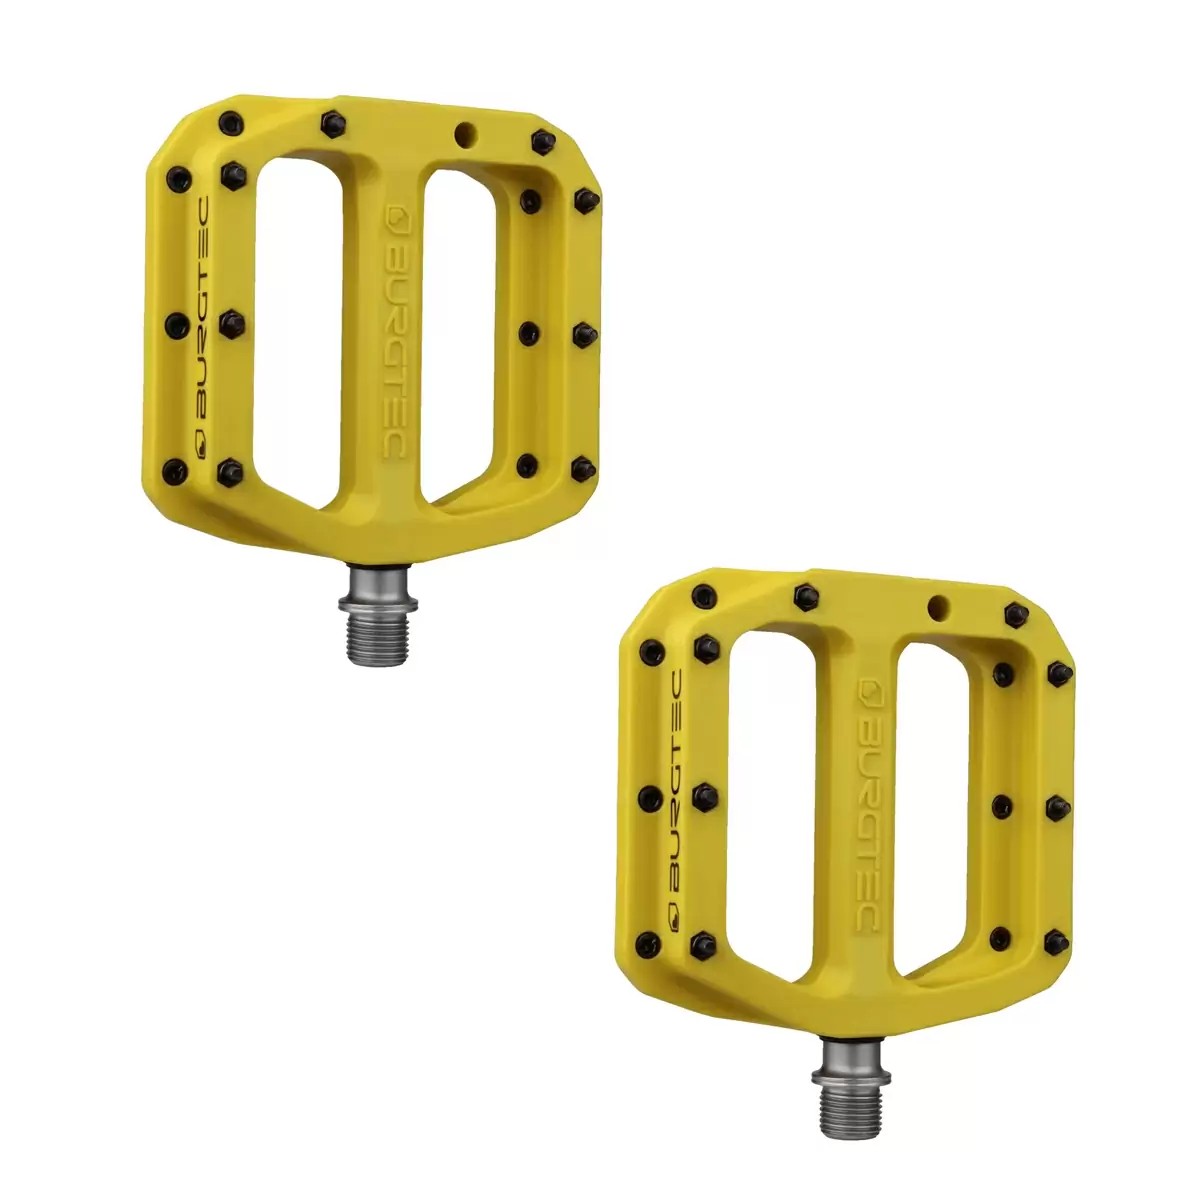 Flat Pedals Set MK4 Composite 1508 Yellow - image